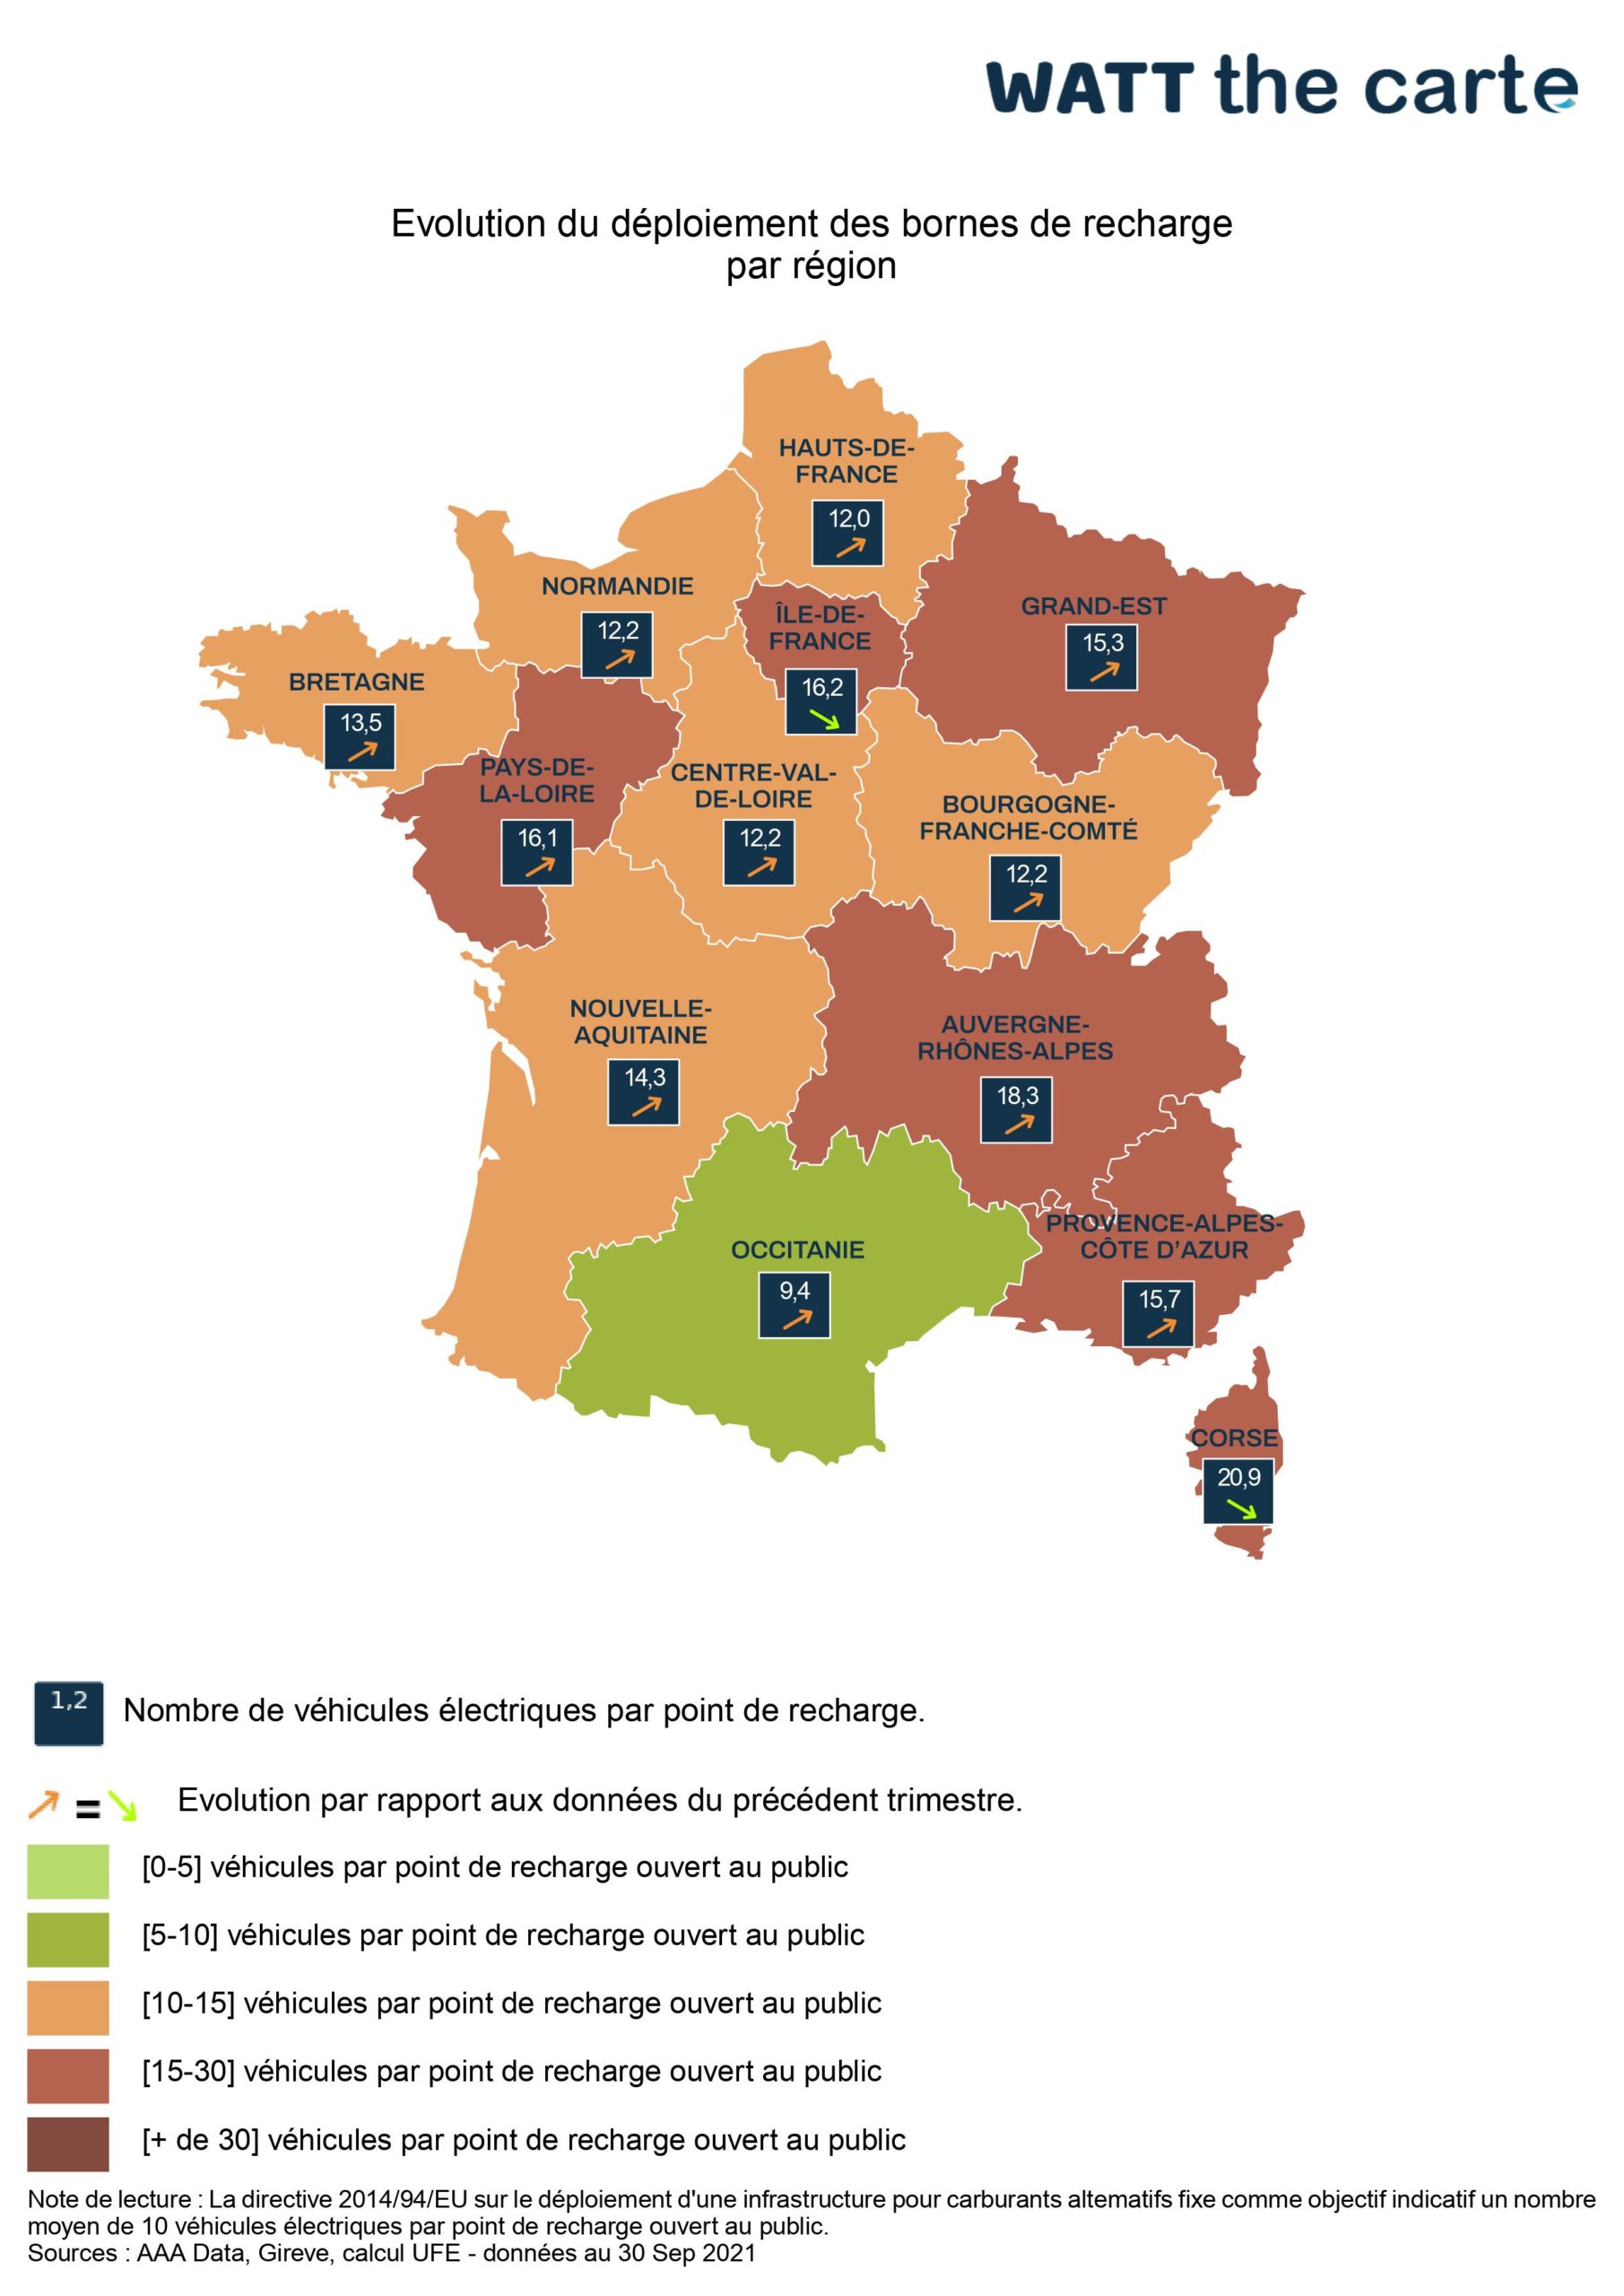 Zoom in on the deployment of charging infrastructure in France